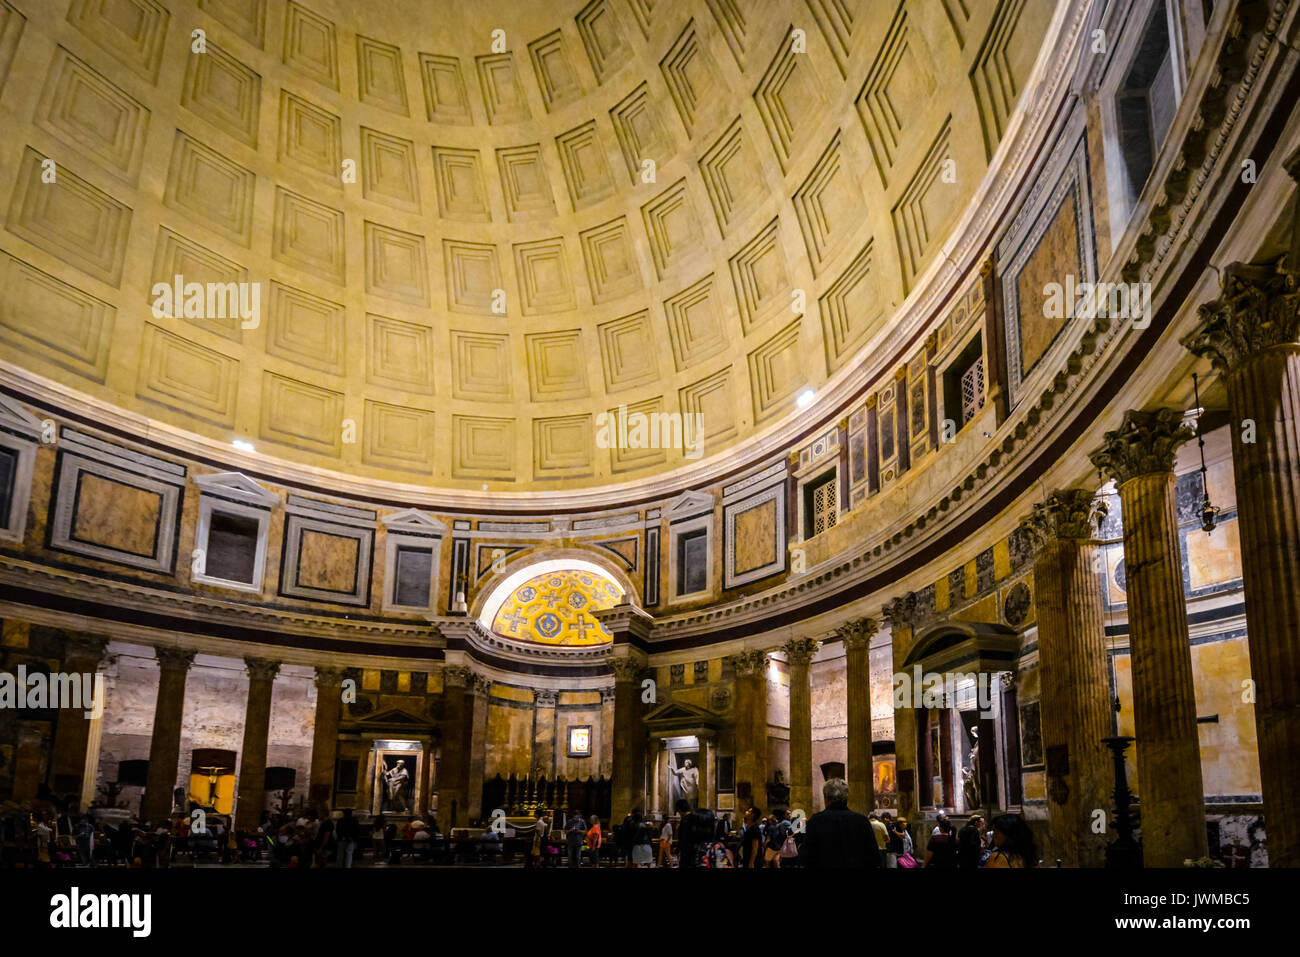 Interior of the ancient Pantheon including the dome, columns and marble statues in Rome Italy at night Stock Photo